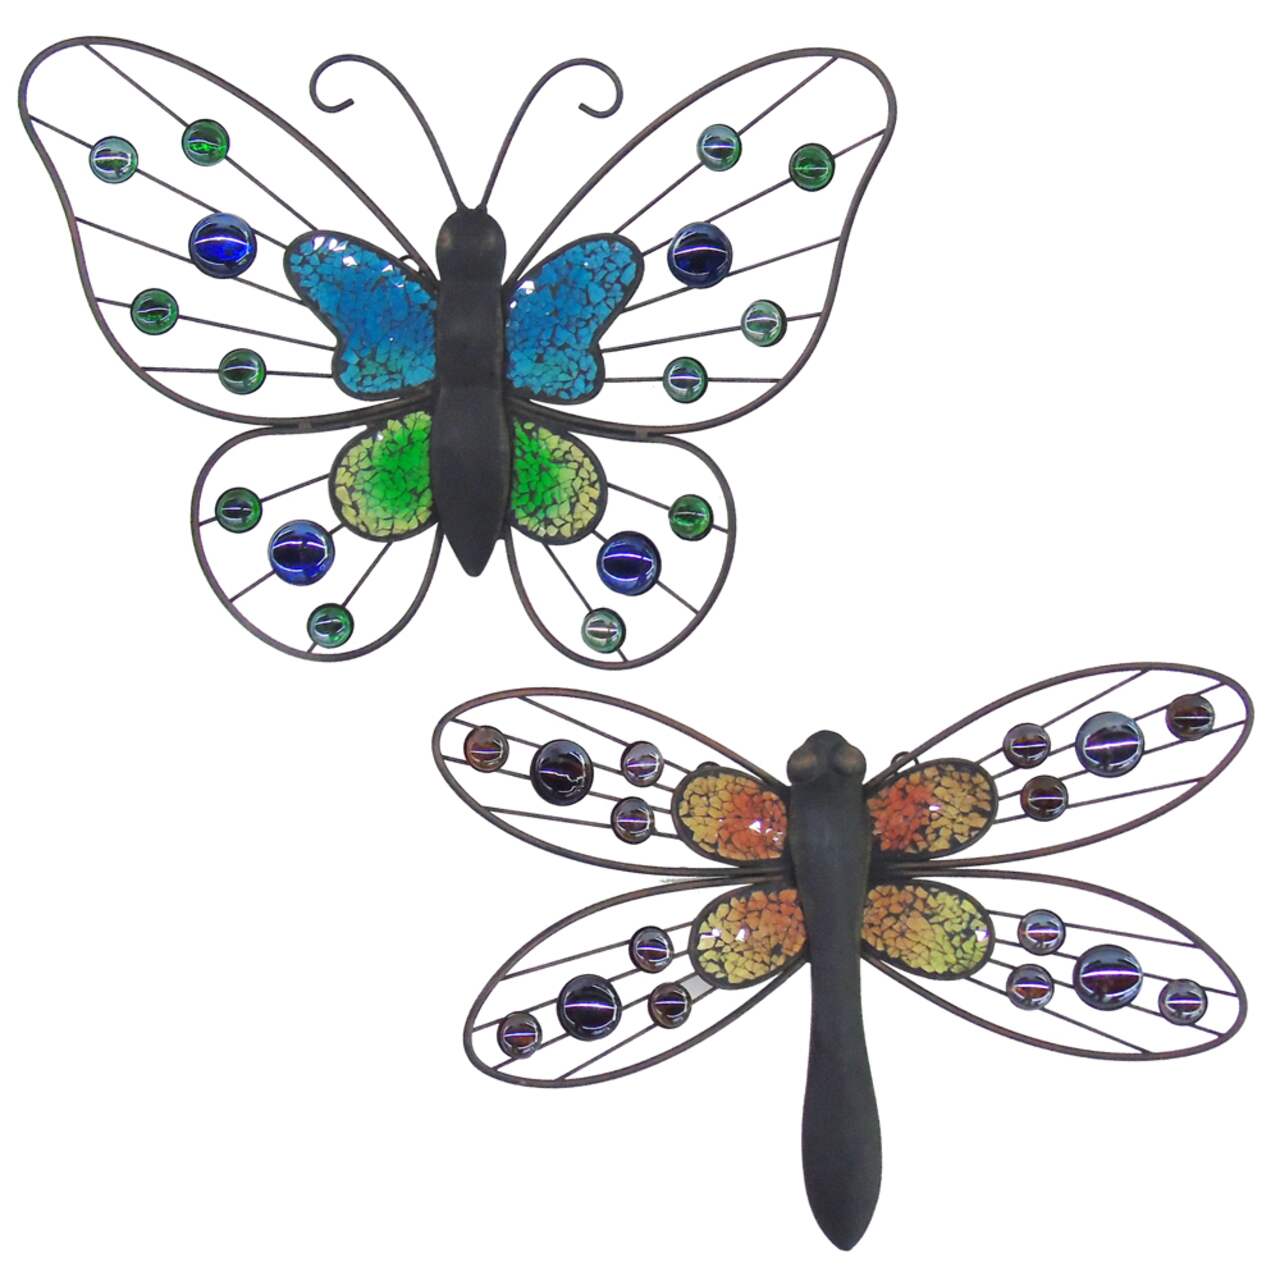 For Living Jewelled Butterfly or Dragonfly Outdoor Wall Art